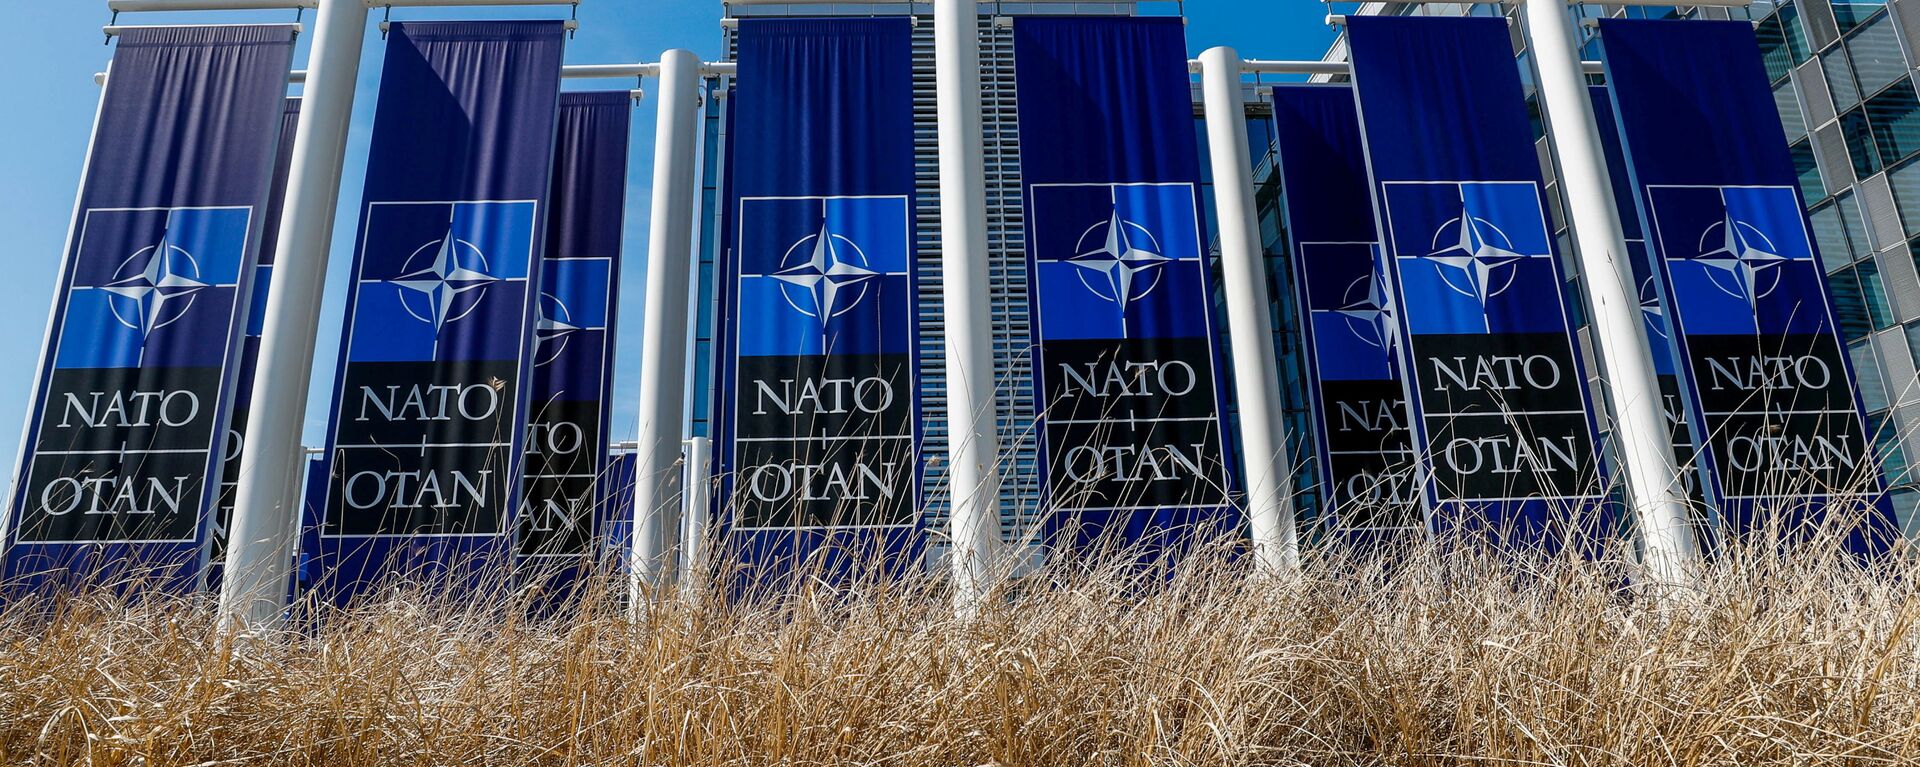 FILE PHOTO: Banners displaying the NATO logo are placed at the entrance of new NATO headquarters during the move to the new building, in Brussels, Belgium April 19, 2018.  REUTERS/Yves Herman/File Photo - Sputnik International, 1920, 14.06.2021